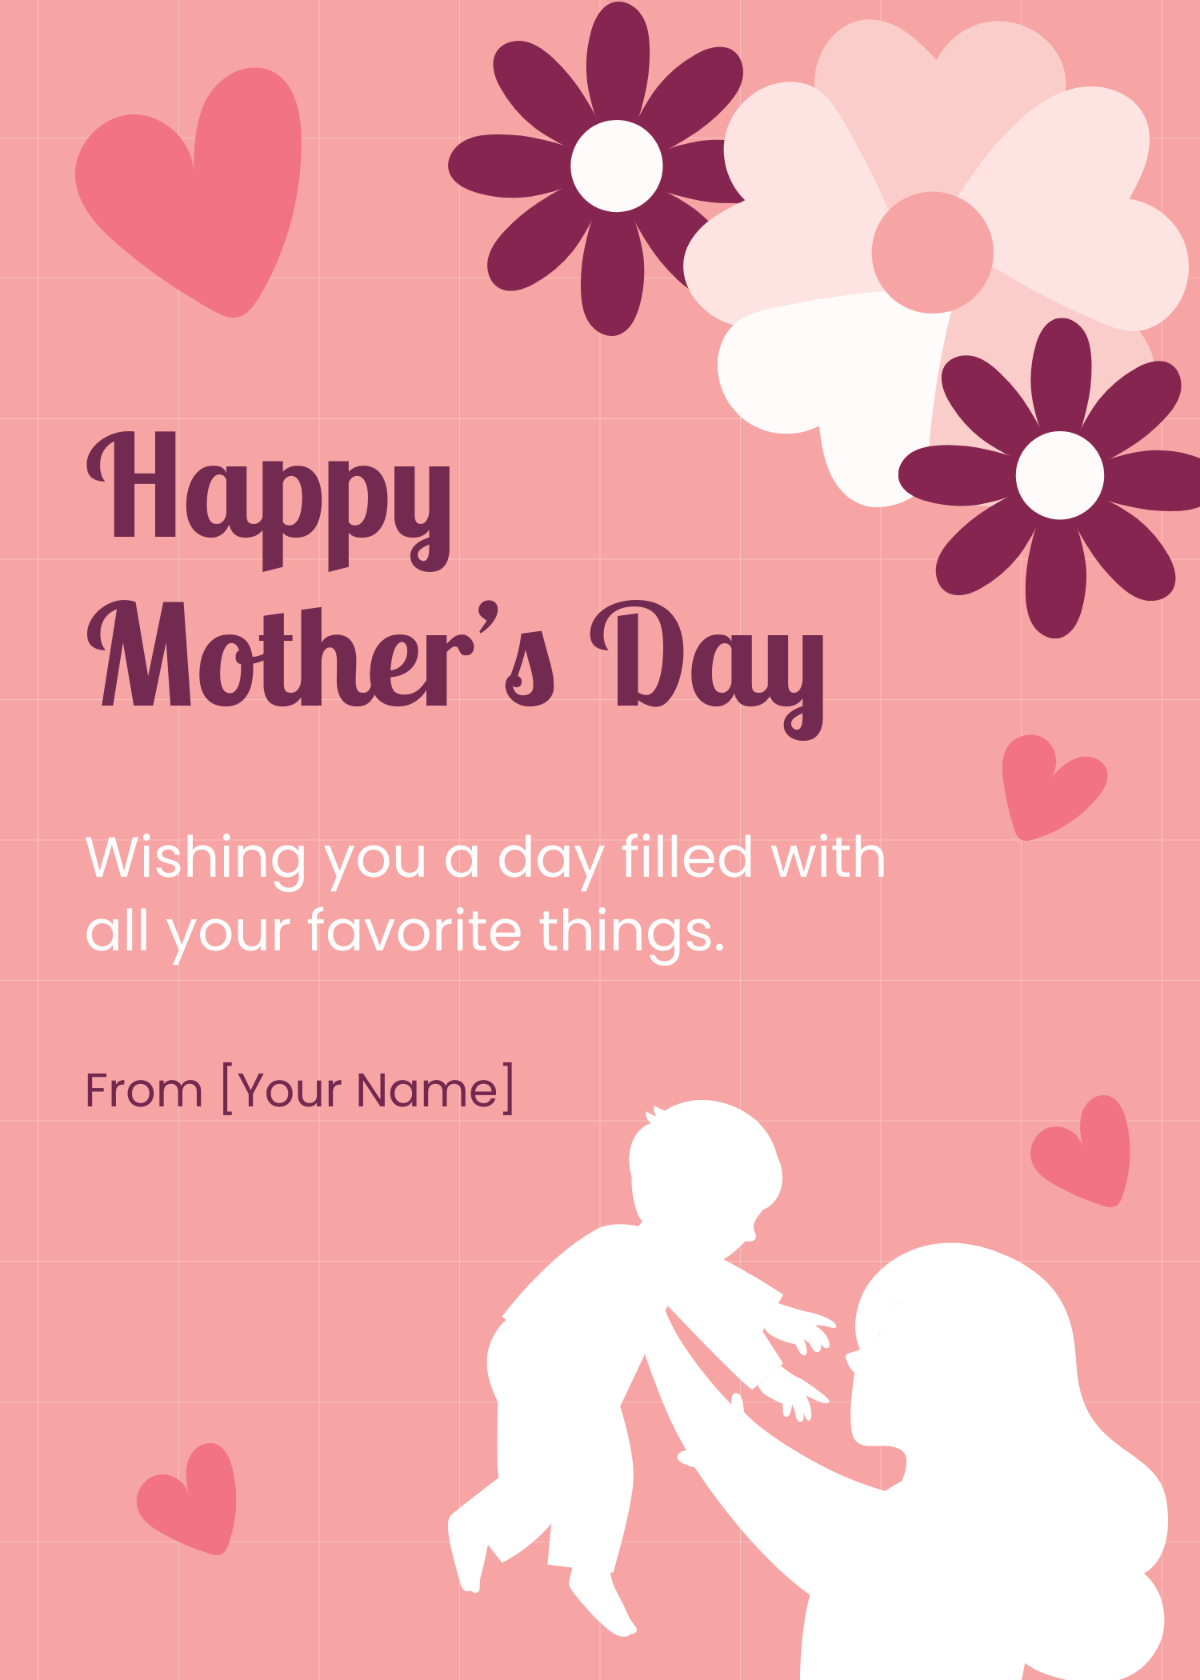 Mother's Day Wishes Template